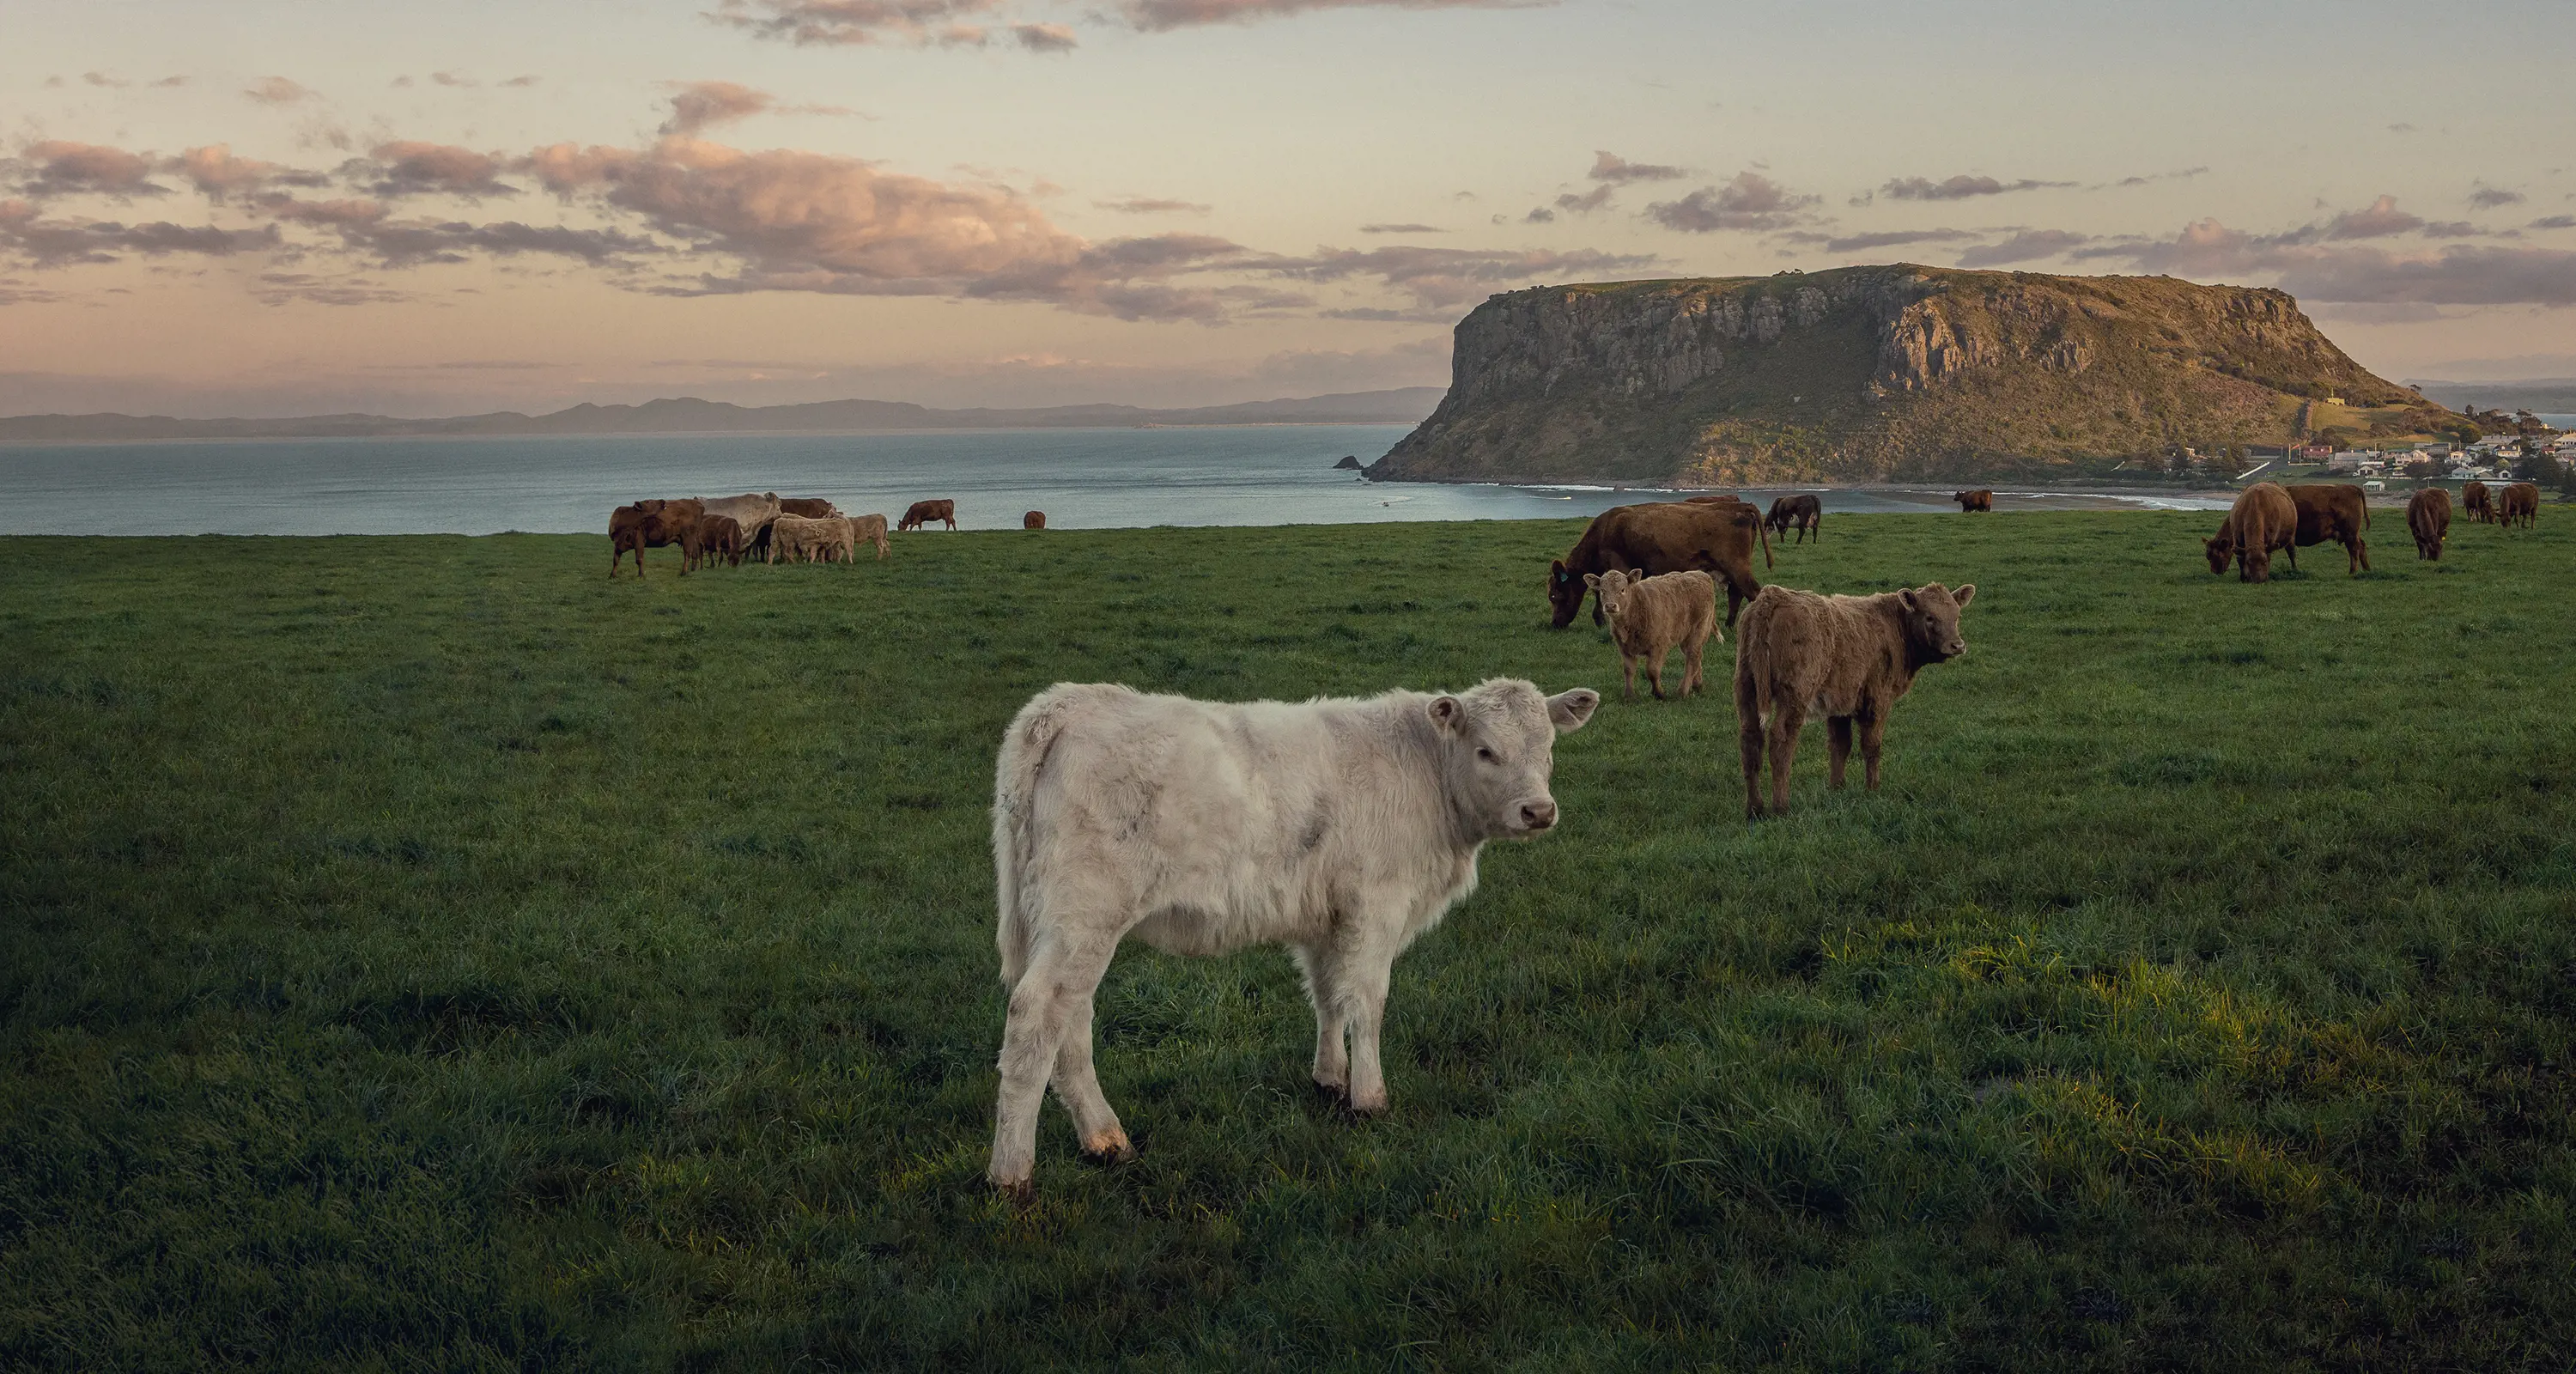 A white cow stands in a herd of brown cows on lush green grass. A large flat-topped peninsula is in the far distance.